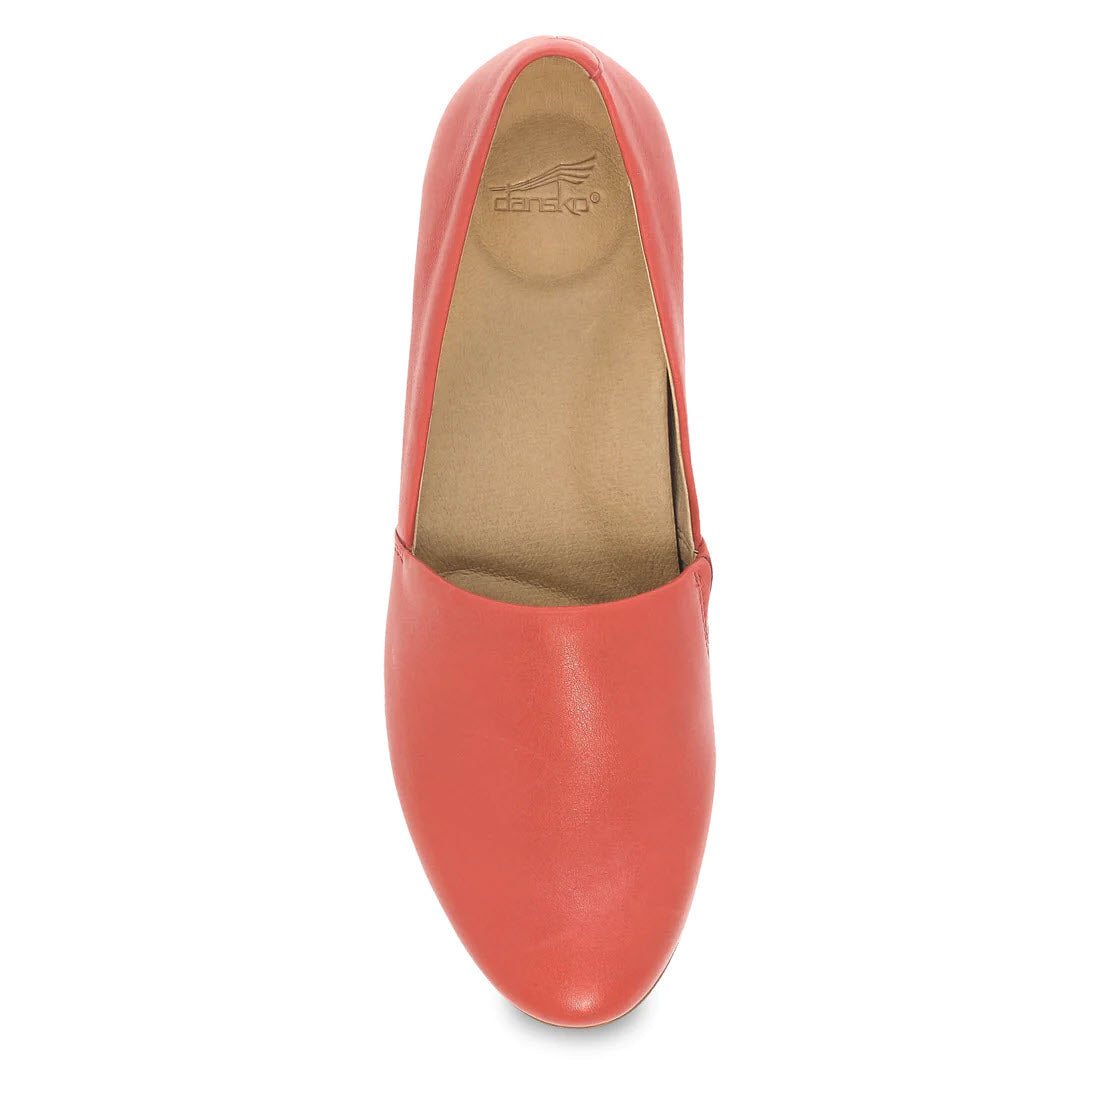 Dansko Larisa Poppy red leather uppers flat shoe viewed from above, featuring Dansko Natural Arch technology for enhanced arch support.